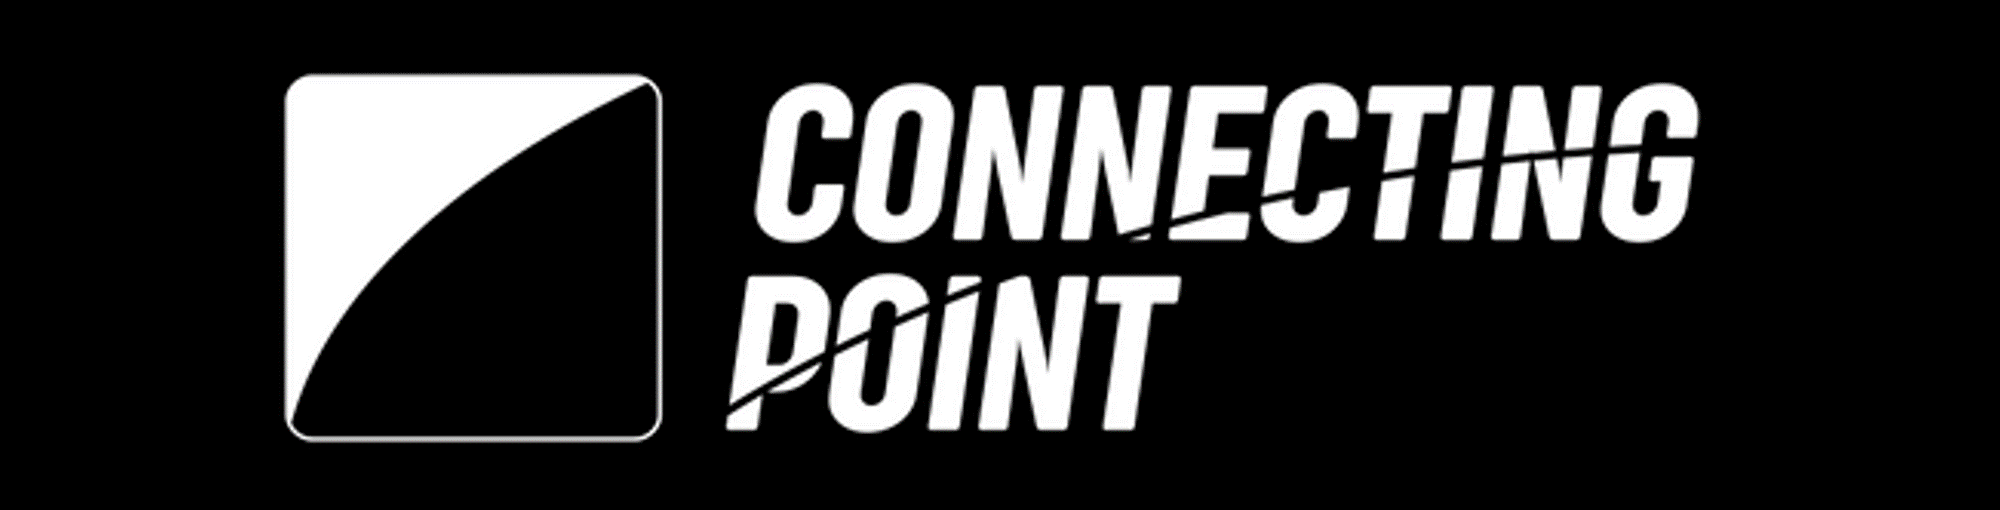 Connecting Point